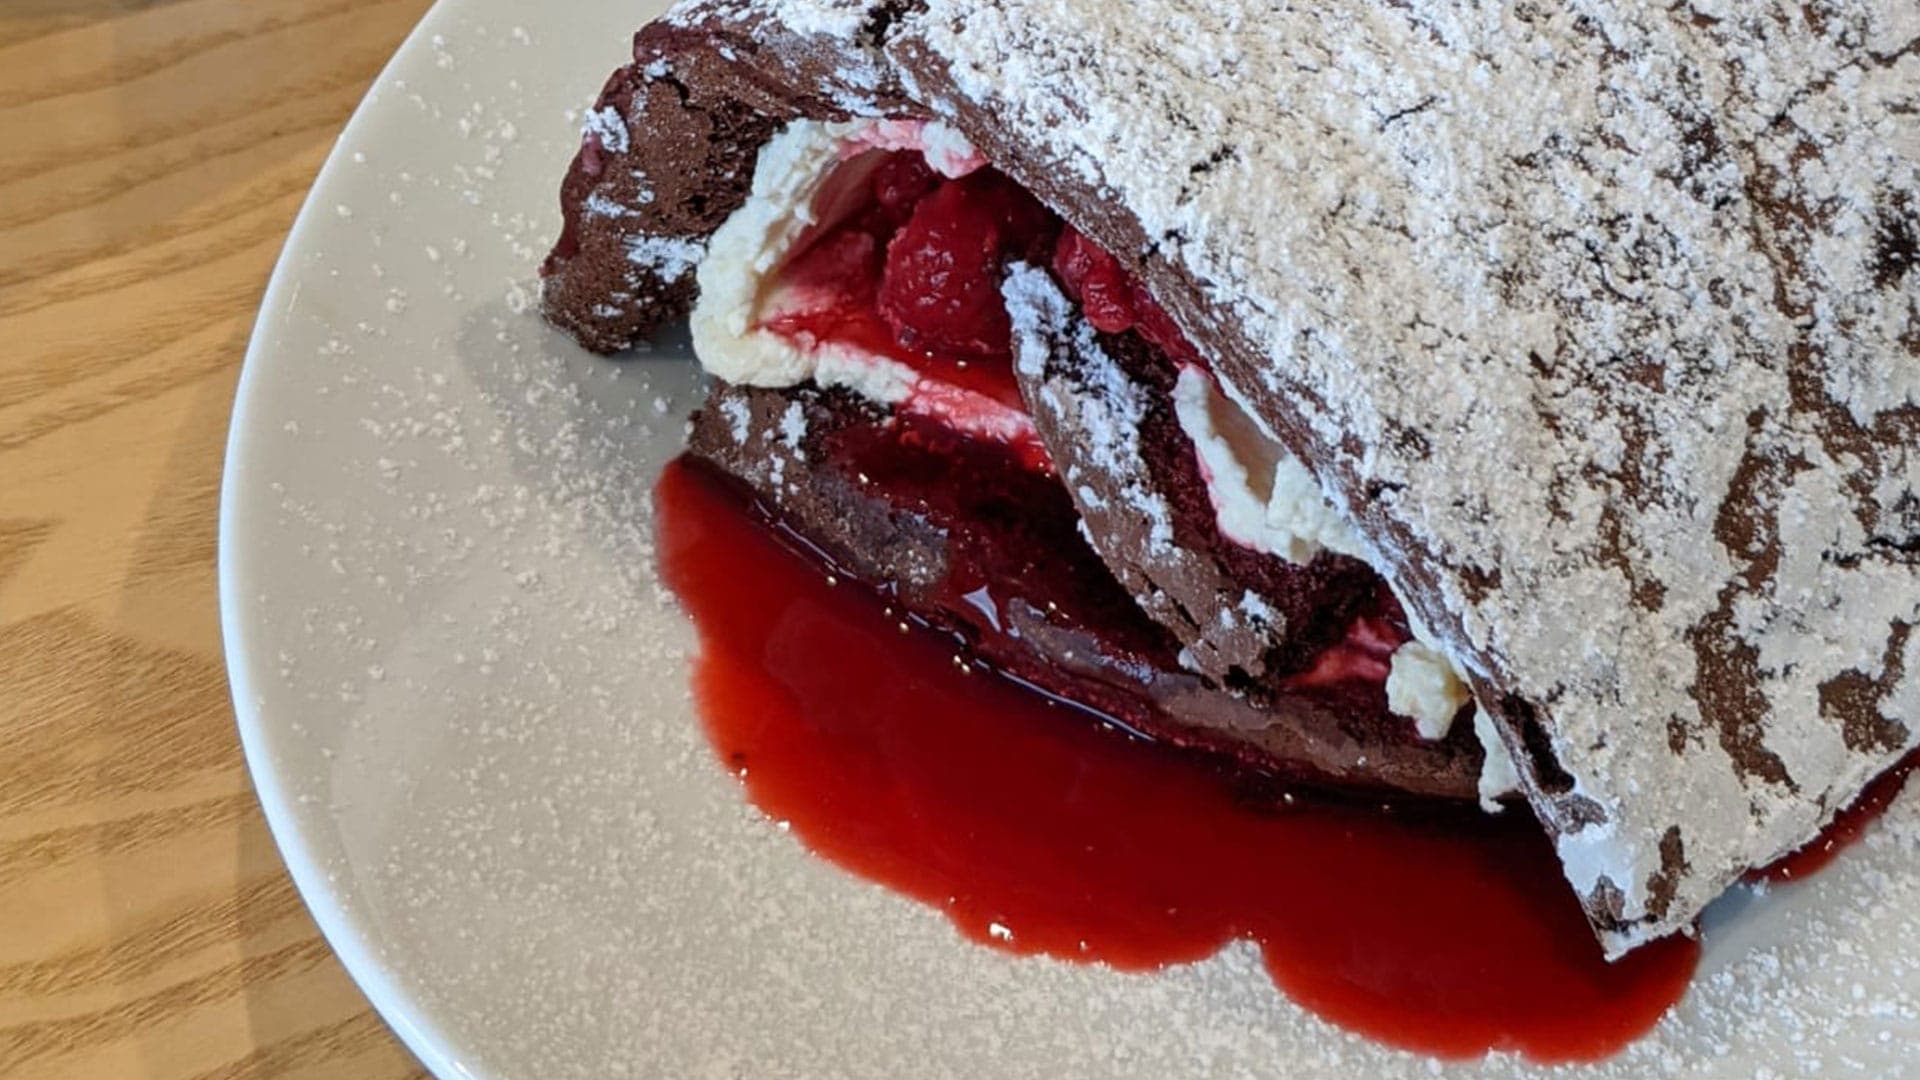 Chocolate roulade and raspberry coulis using Siemens appliances